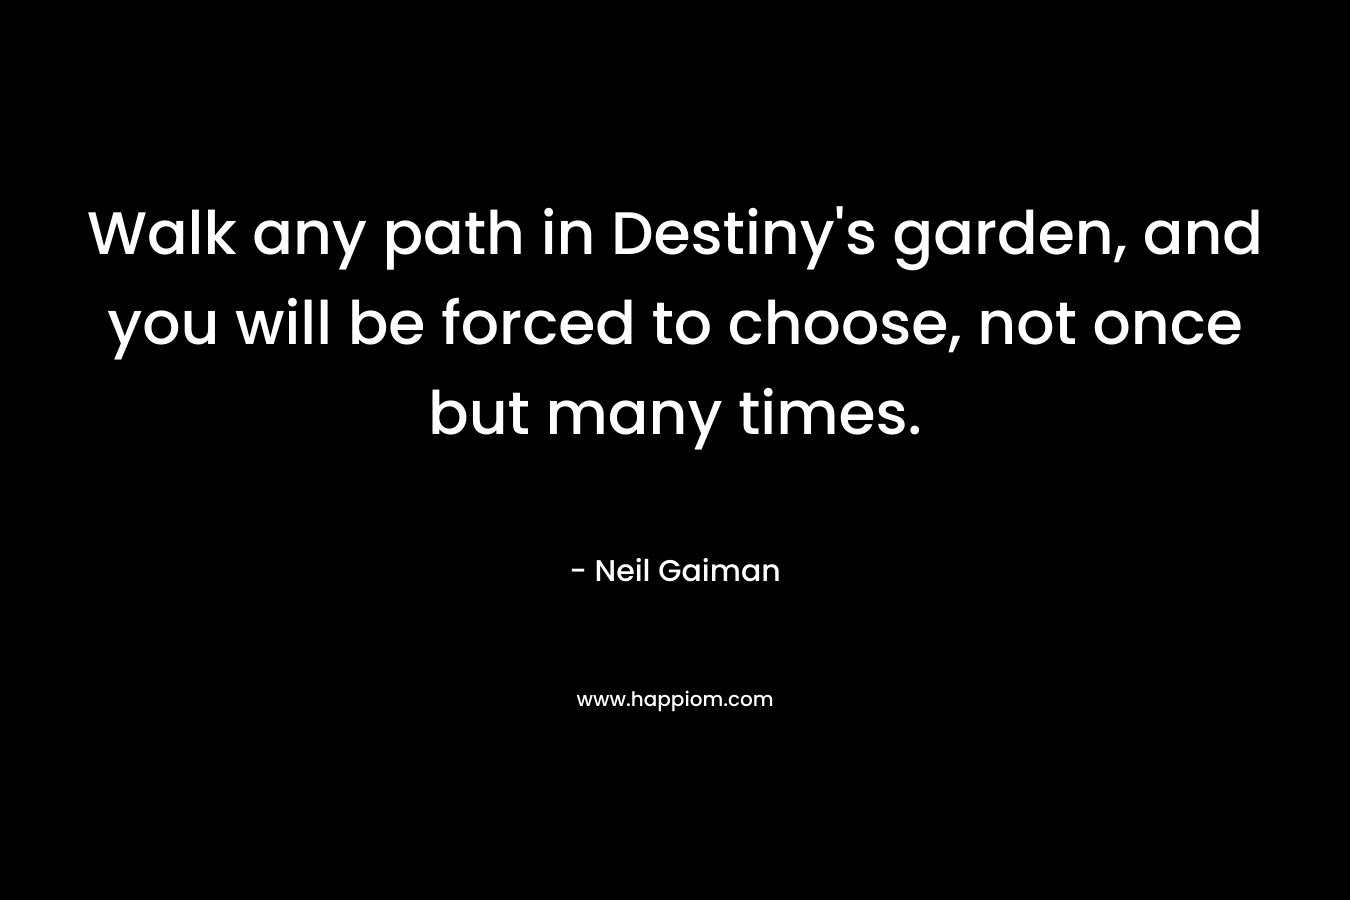 Walk any path in Destiny's garden, and you will be forced to choose, not once but many times.